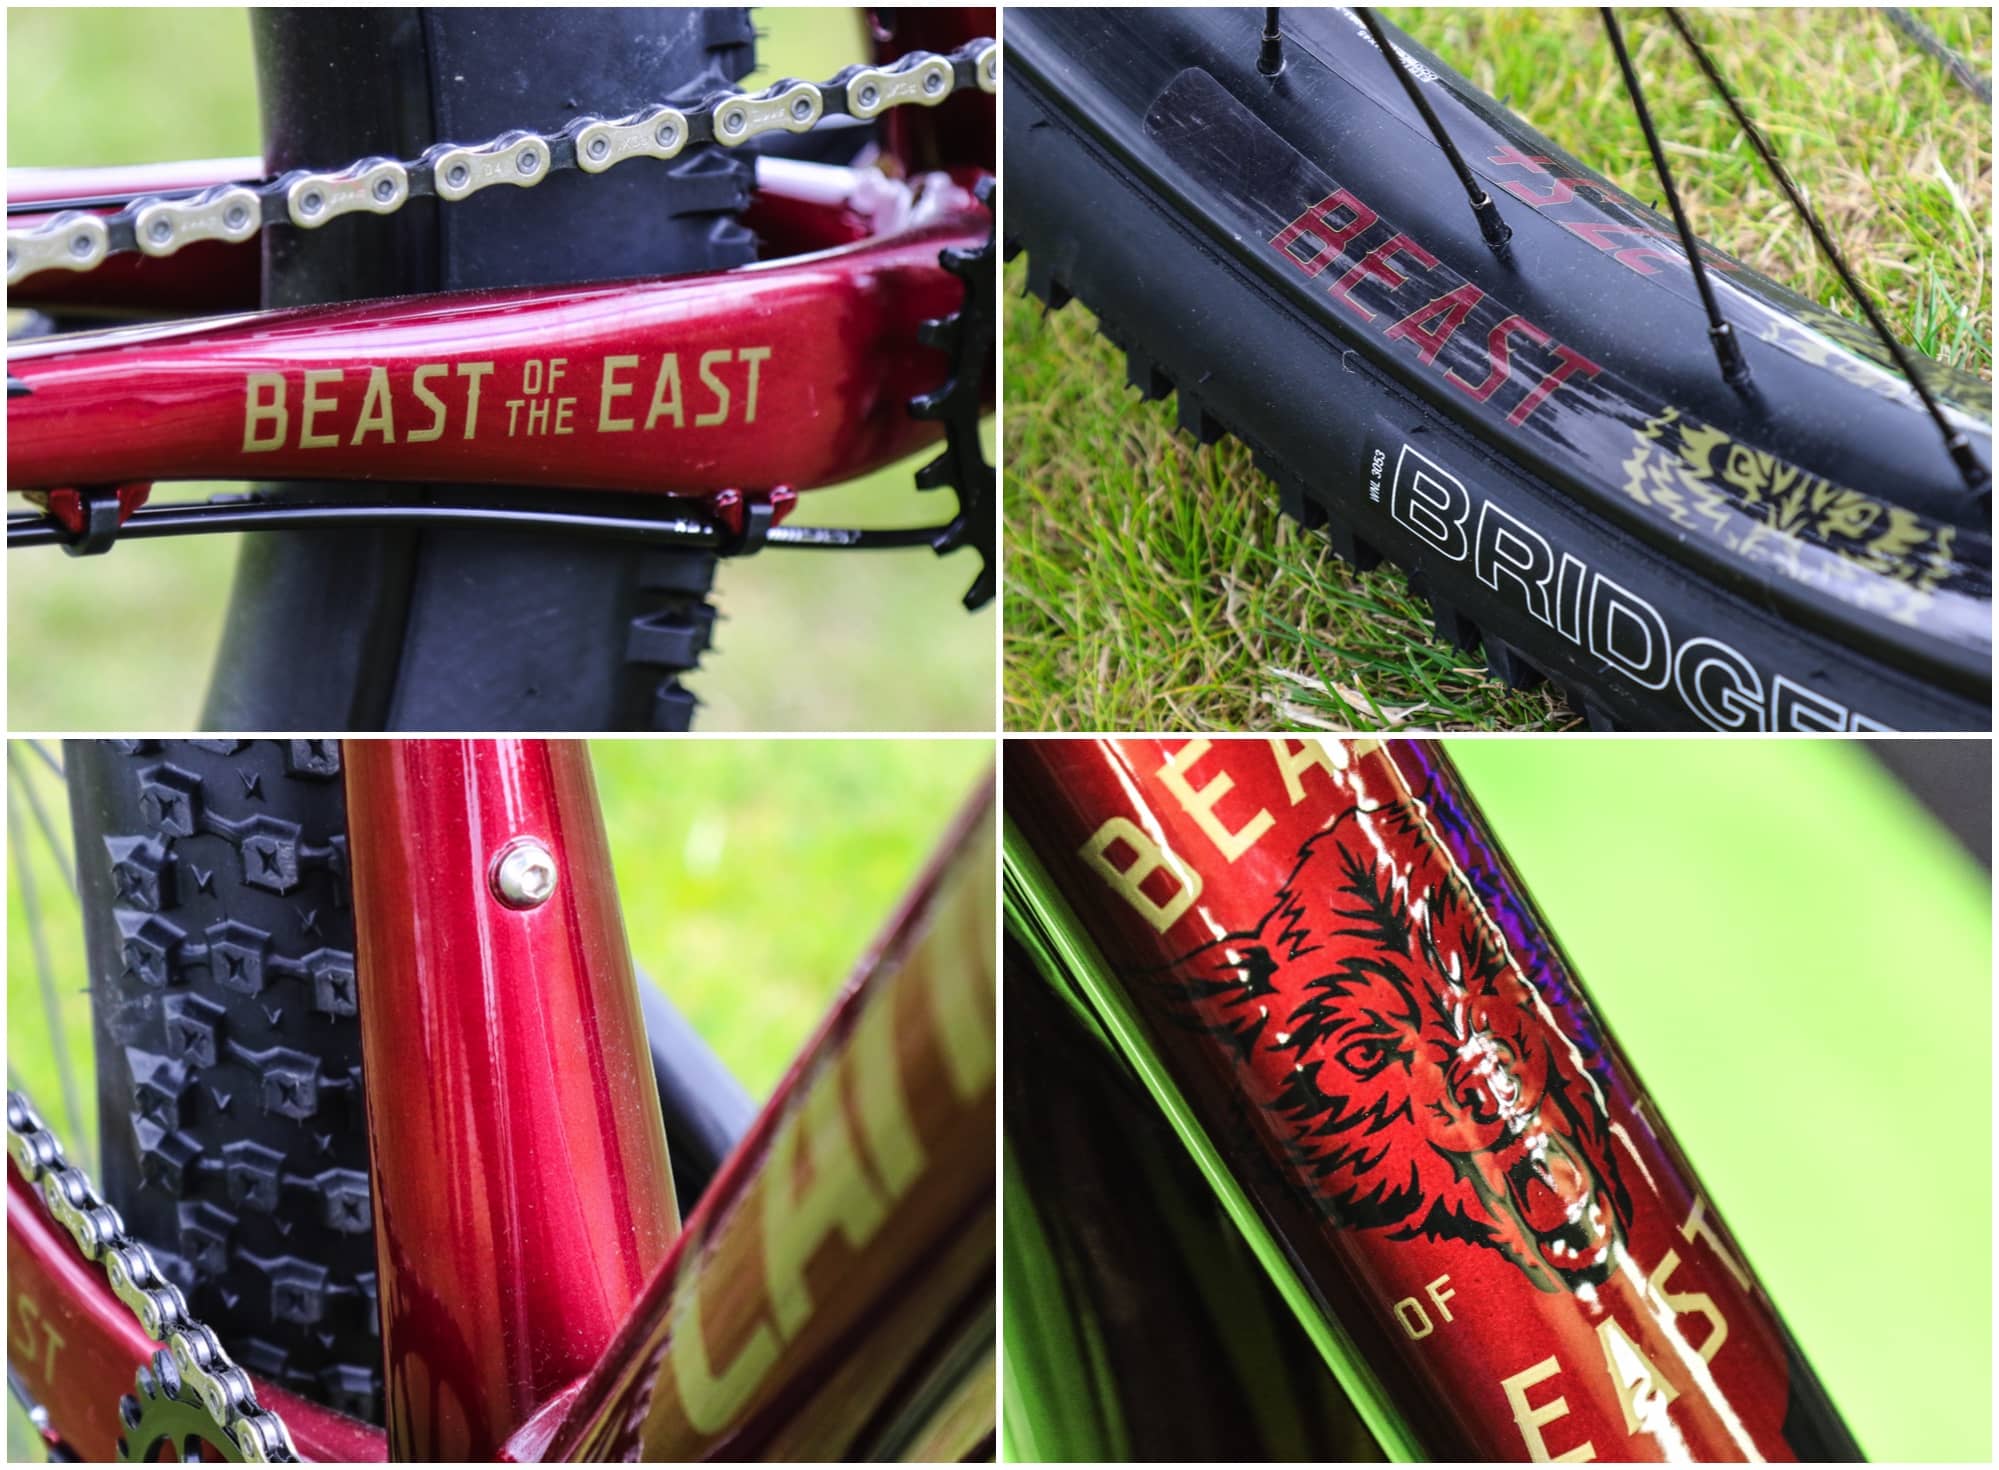 Cannondale Beast Of The East 1 All Products Are Discounted Cheaper Than Retail Price Free Delivery Returns Off 69